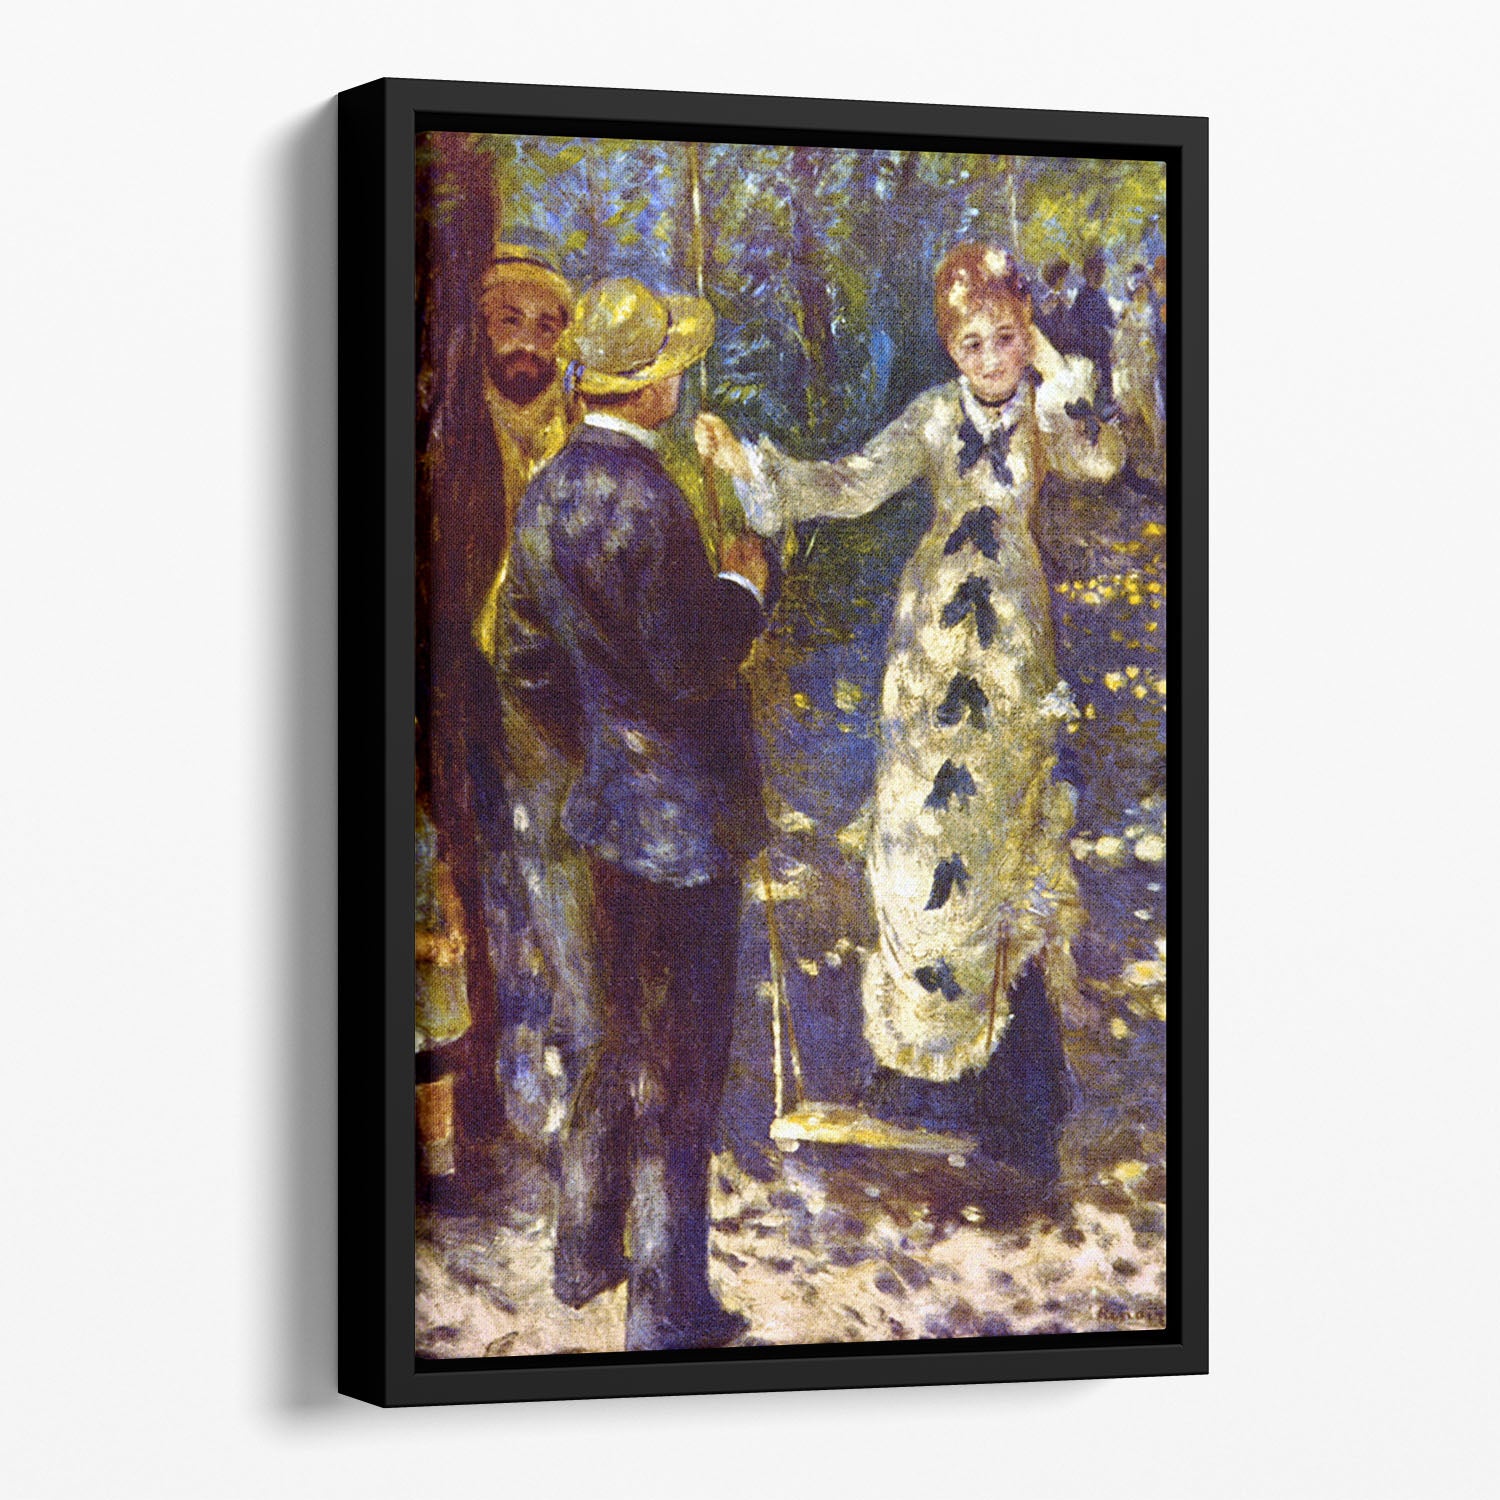 The Swing by Renoir Floating Framed Canvas